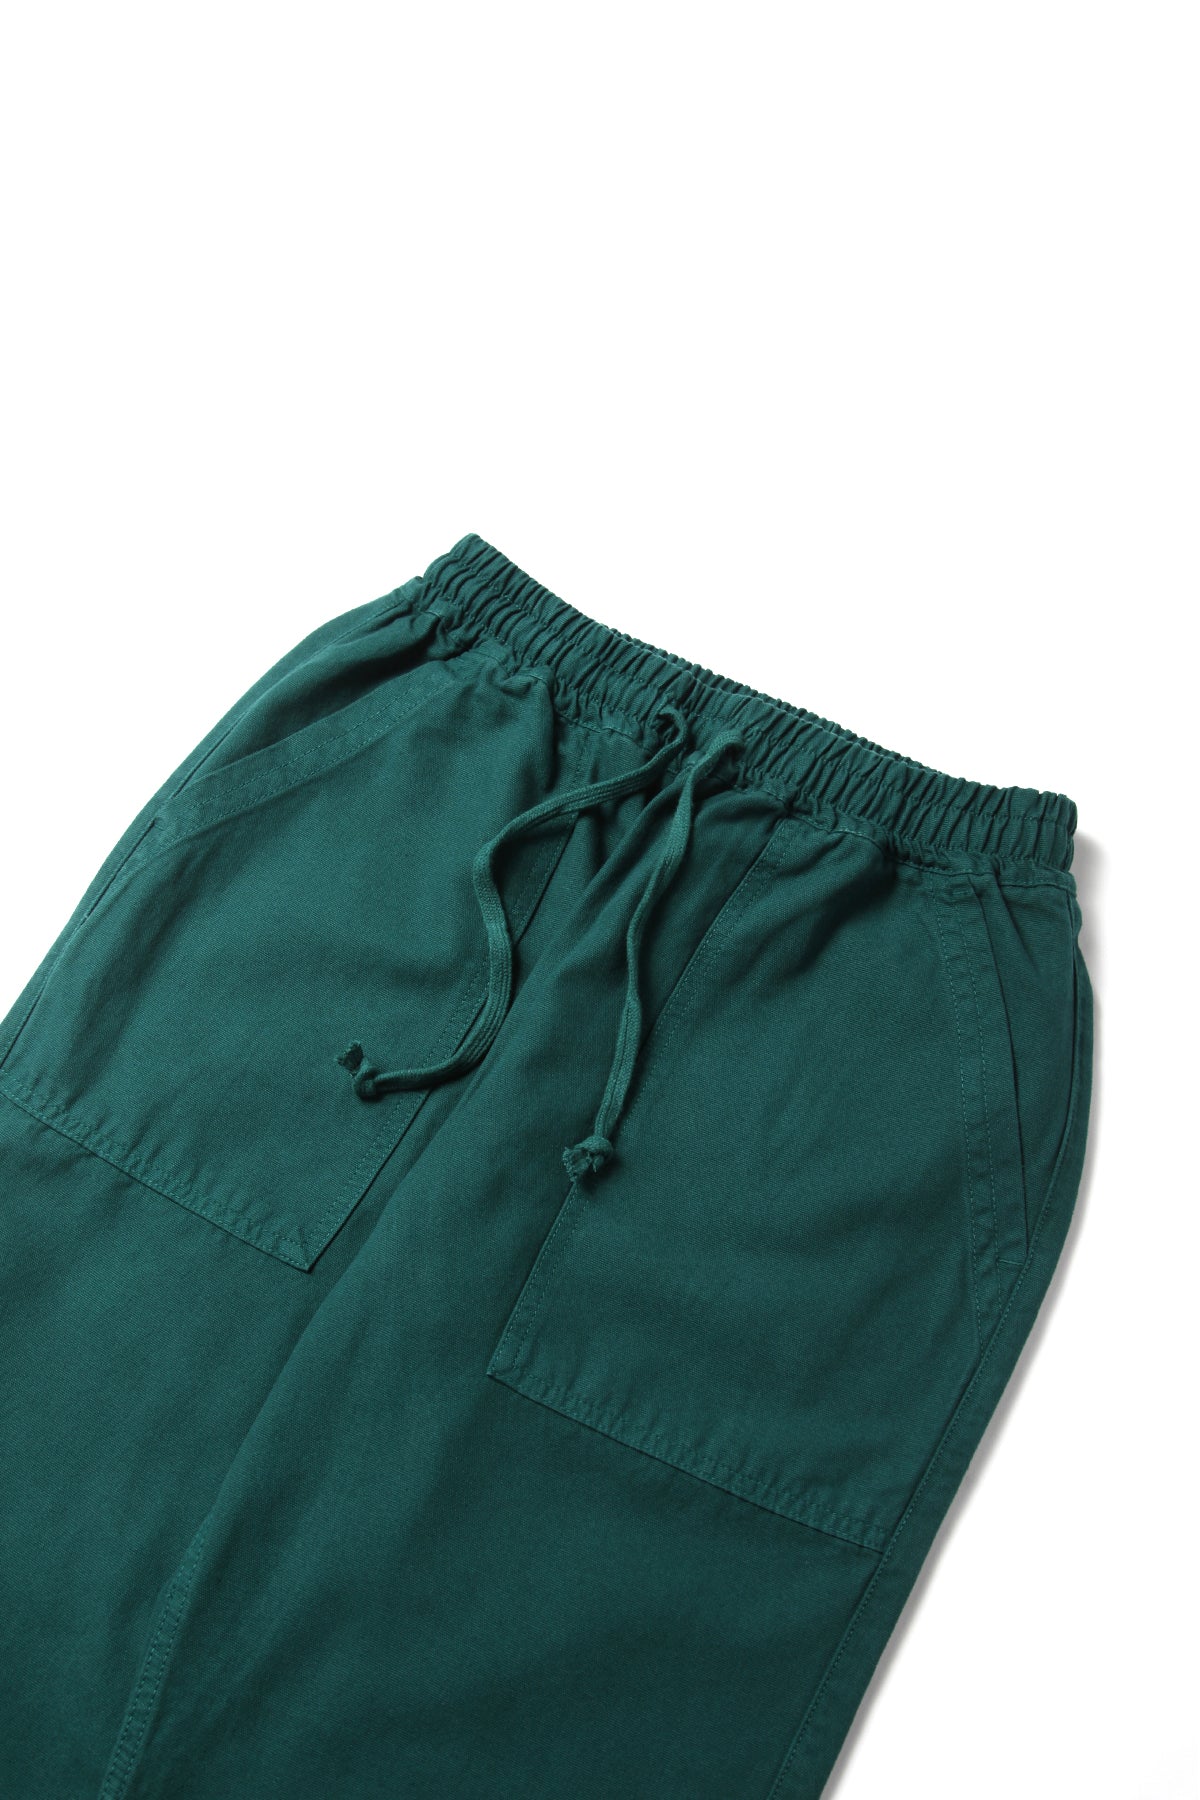 Service Works - Classic Chef Pants - Teal